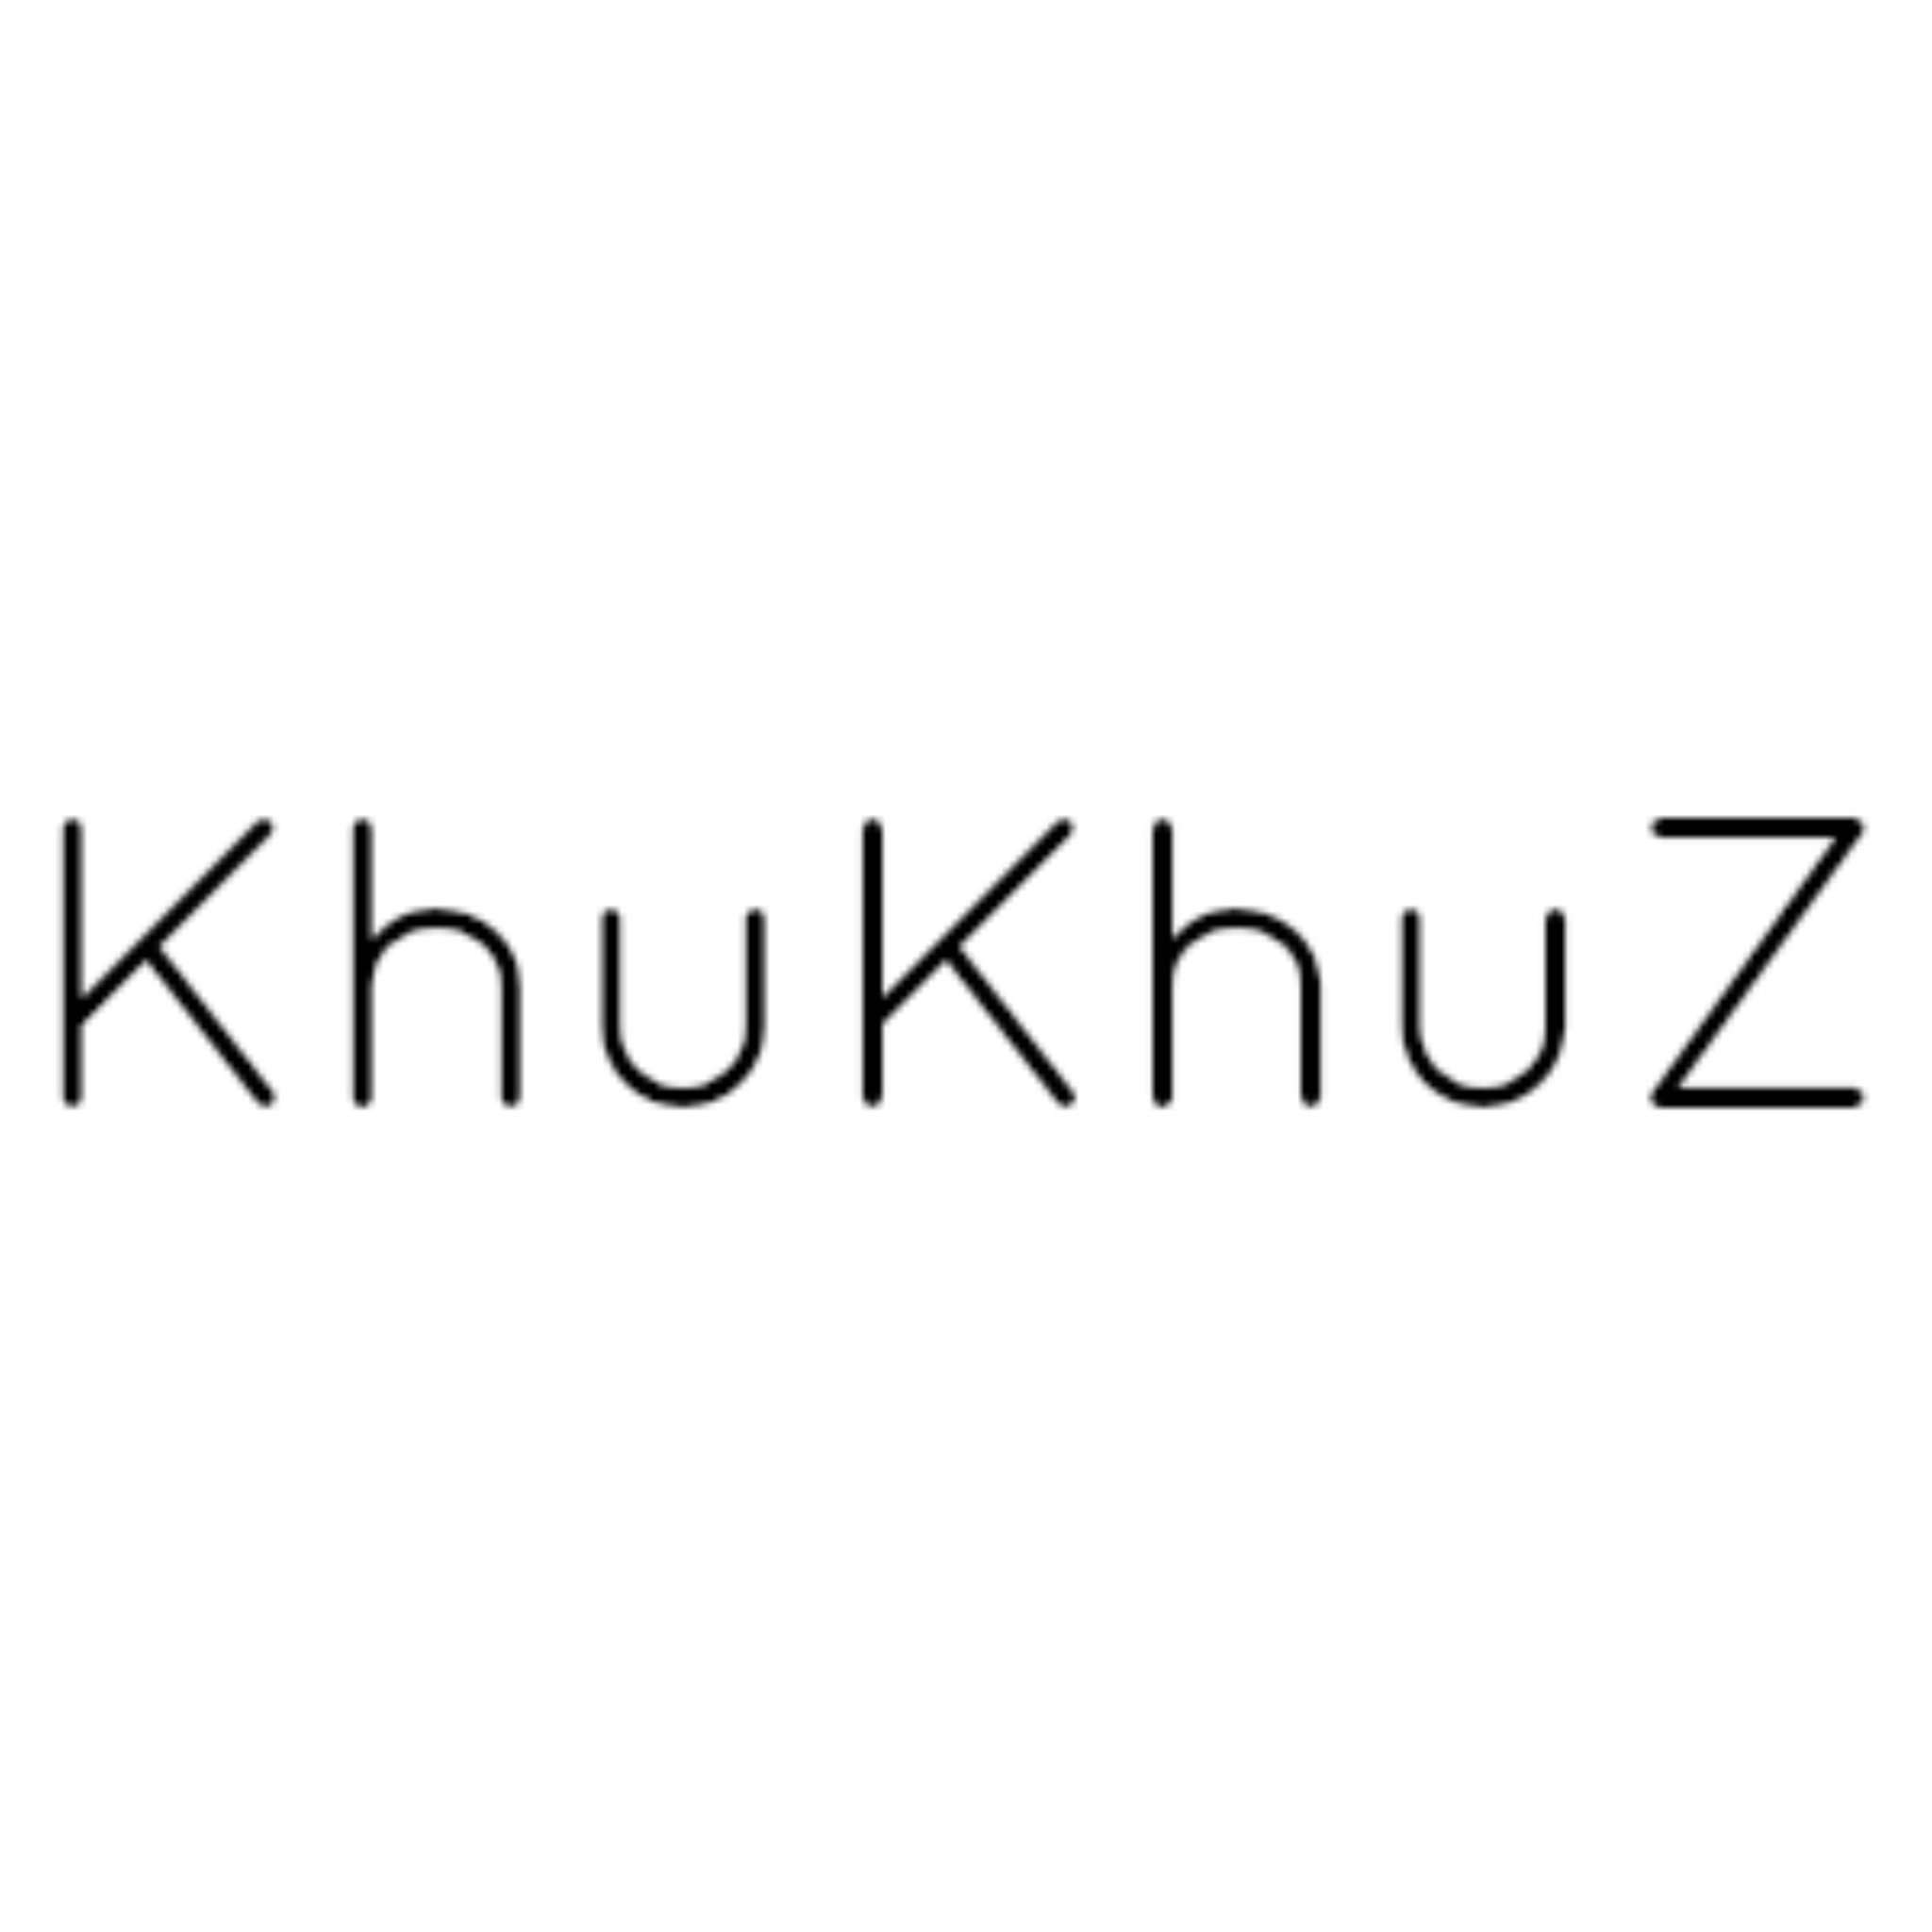 KhuKhuZ is a Fashion and Lifestyle brand. Our products and services are women’s and men’s fashion and accessories, soft furnishings and furniture.